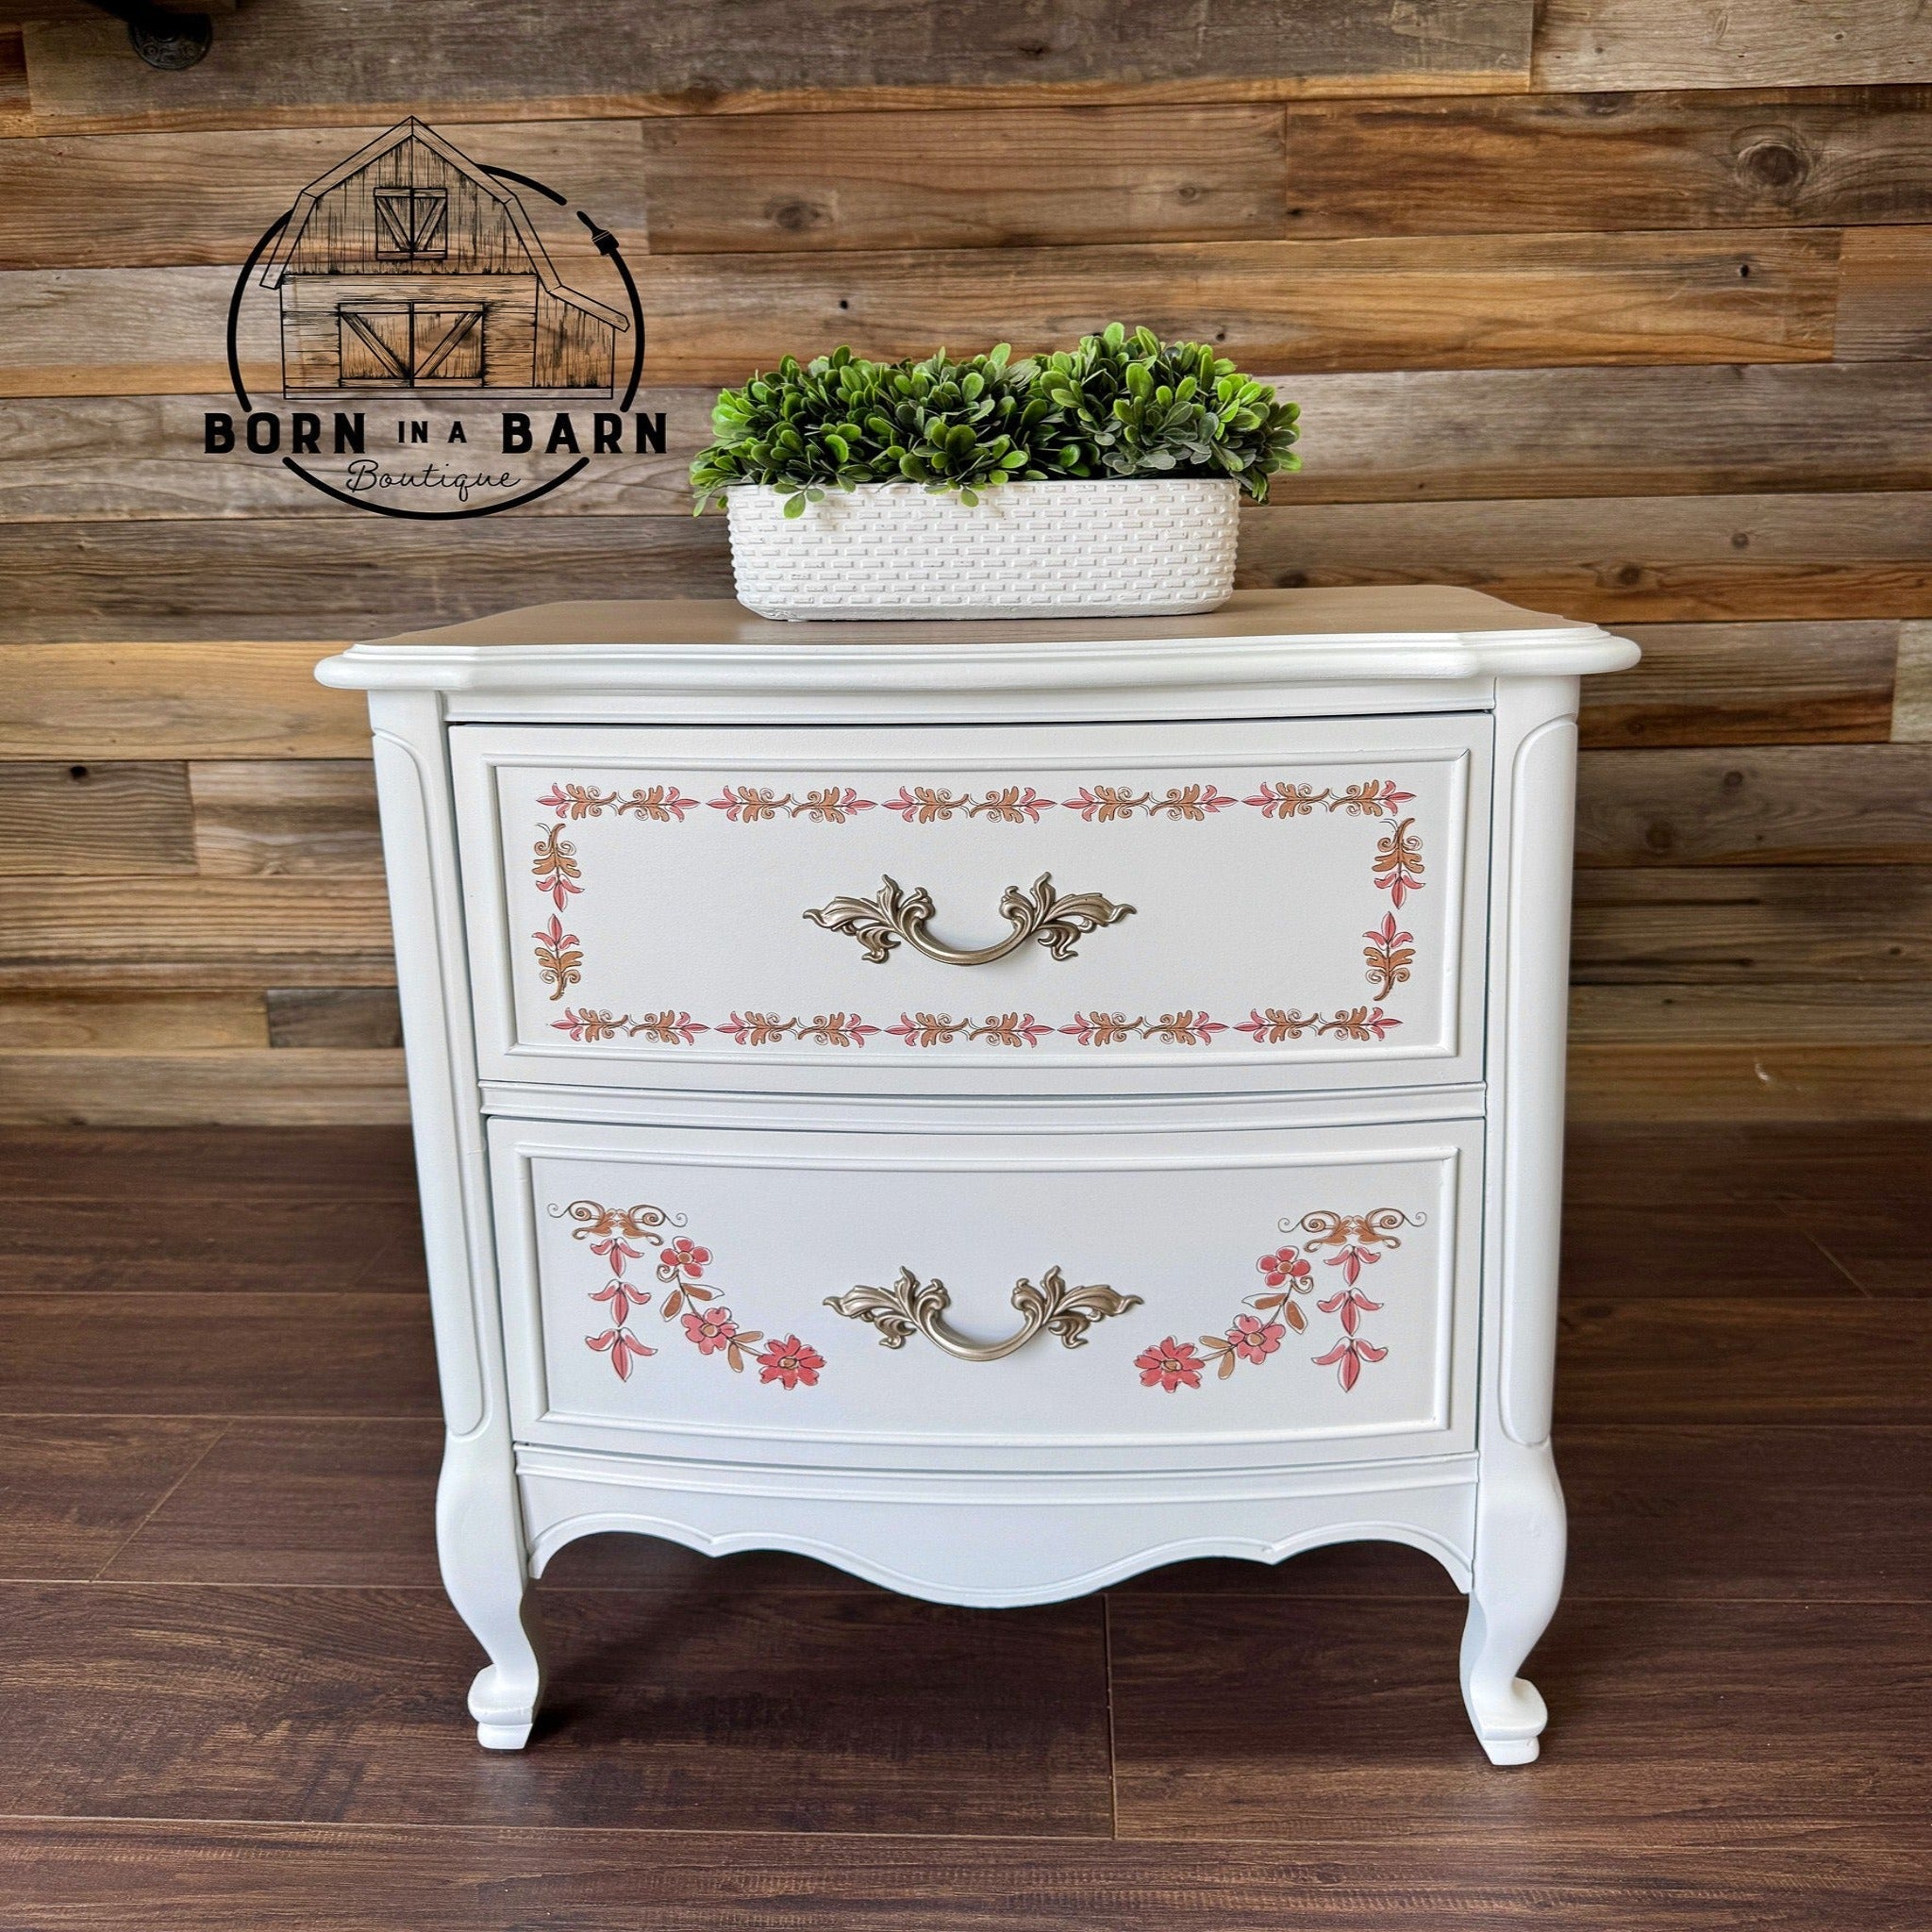 A small white 2-drawer nightstand refurbished by Born in a Barn Boutique features ReDesign with Prima's Annie Sloan Flower Garland rub-on transfer on the drawers.